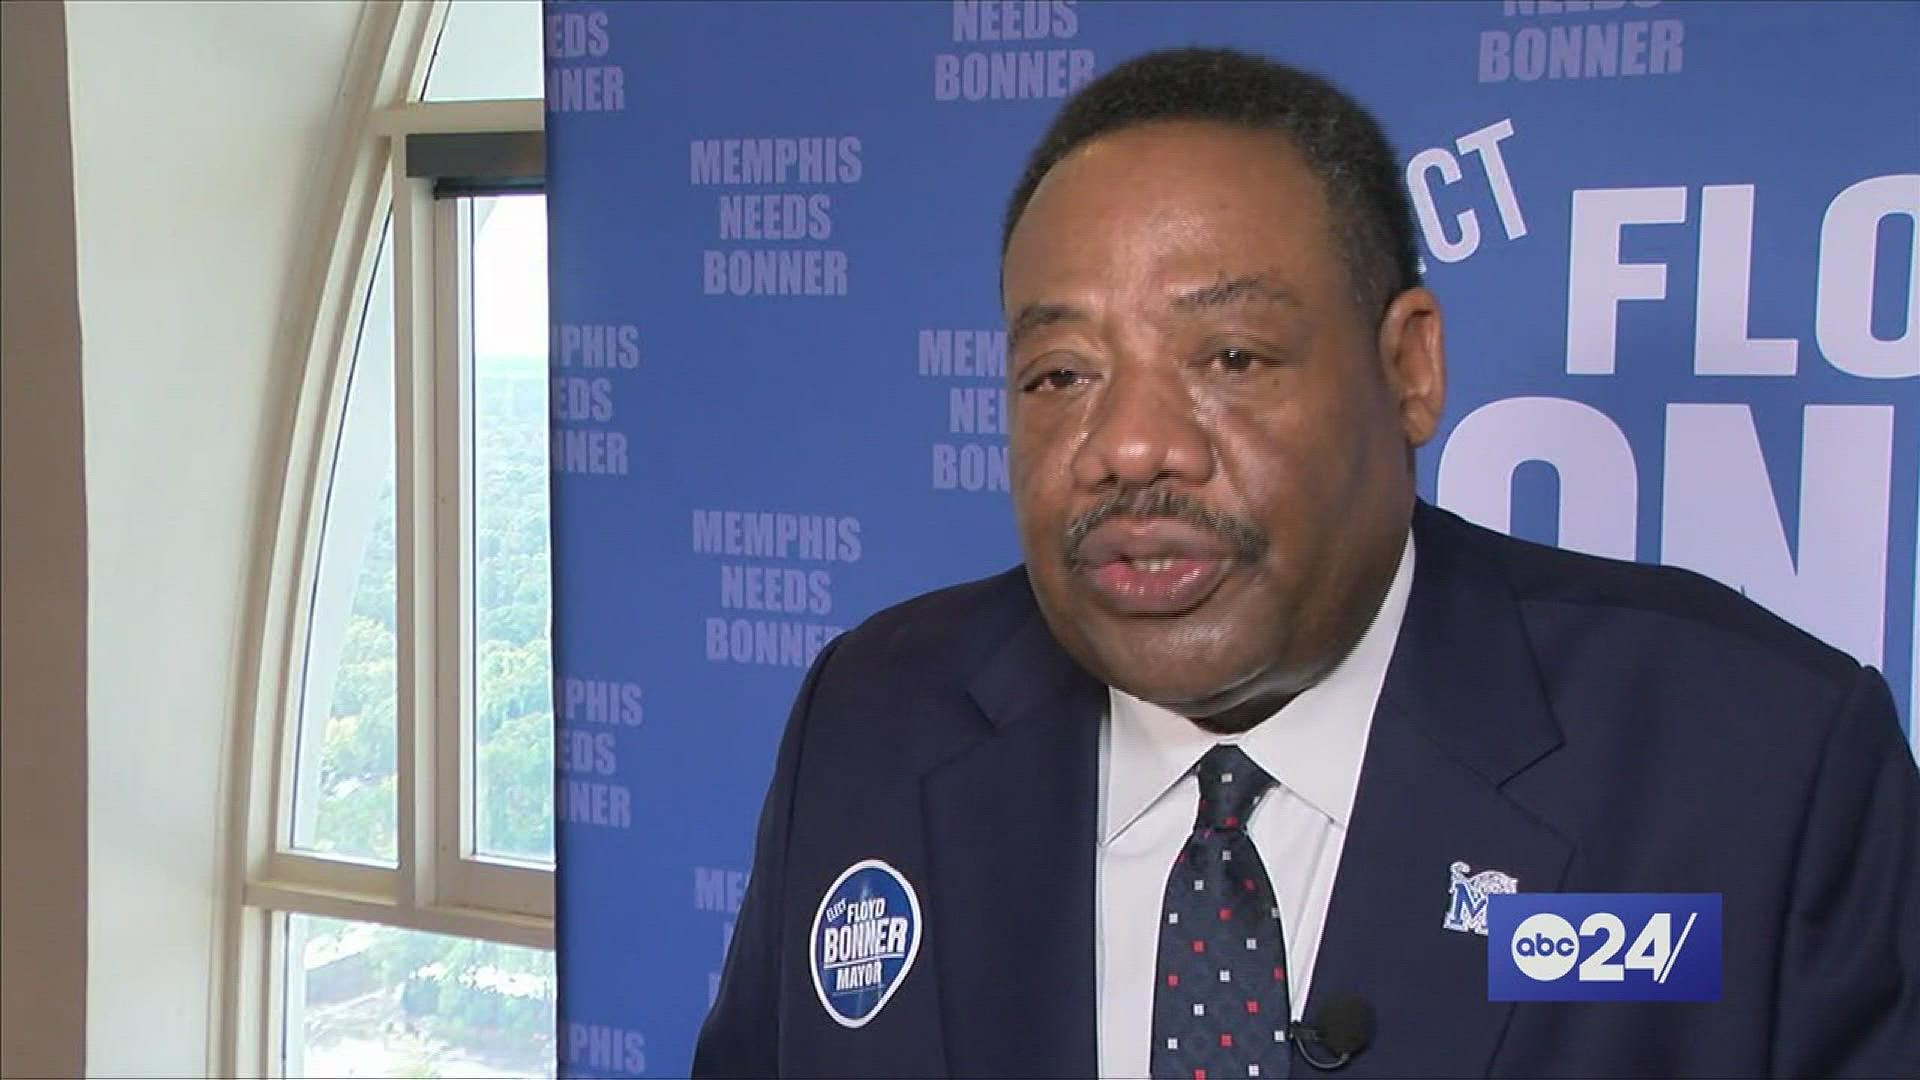 As Sheriff Floyd Bonner has officially announced candidacy for the Memphis mayoral race, Deidre Malone said you shouldn't count Paul Young out either.